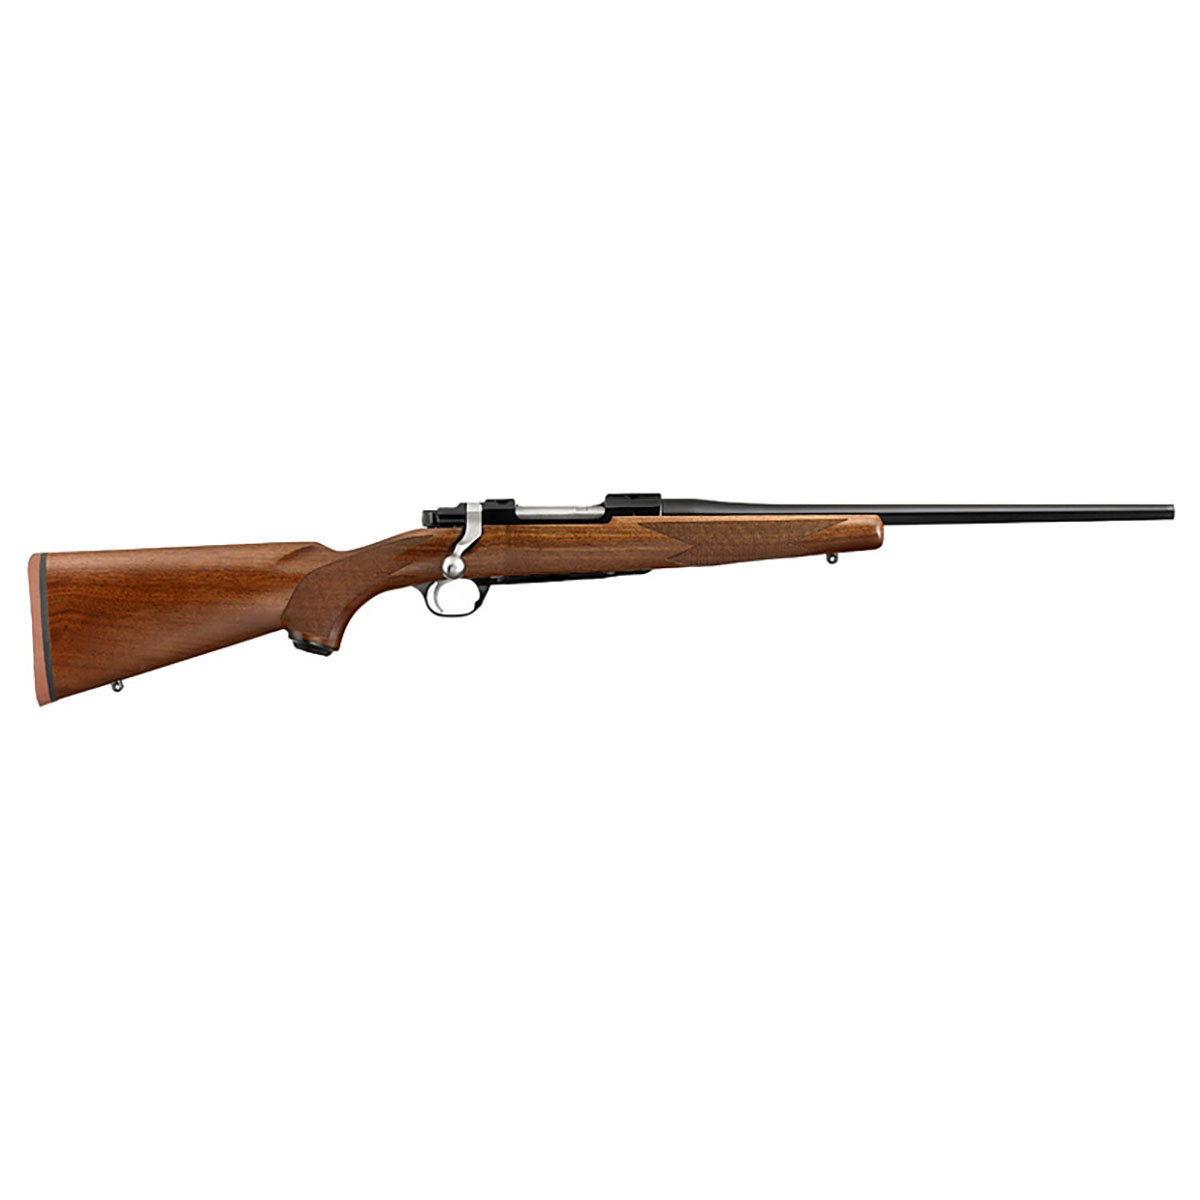 RUGER - HAWKEYE COMPACT 308 WINCHESTER BOLT ACTION RIFLE